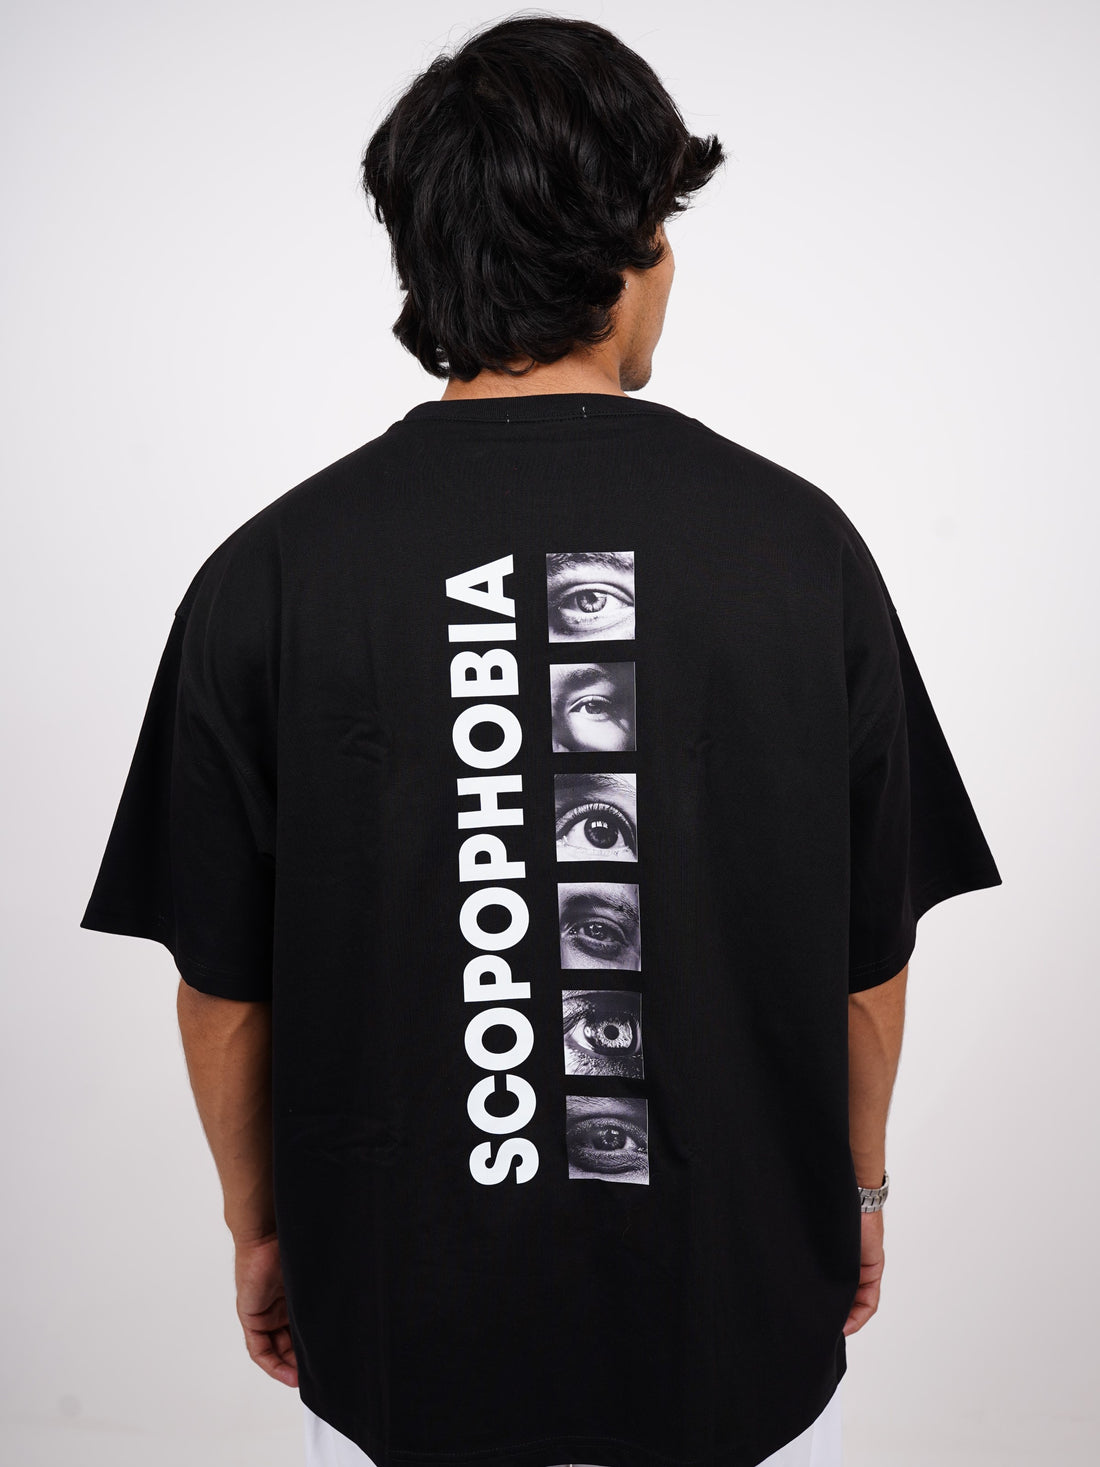 The scopophobia tee - Vision Drop Sleeved  tee   For Men and Women